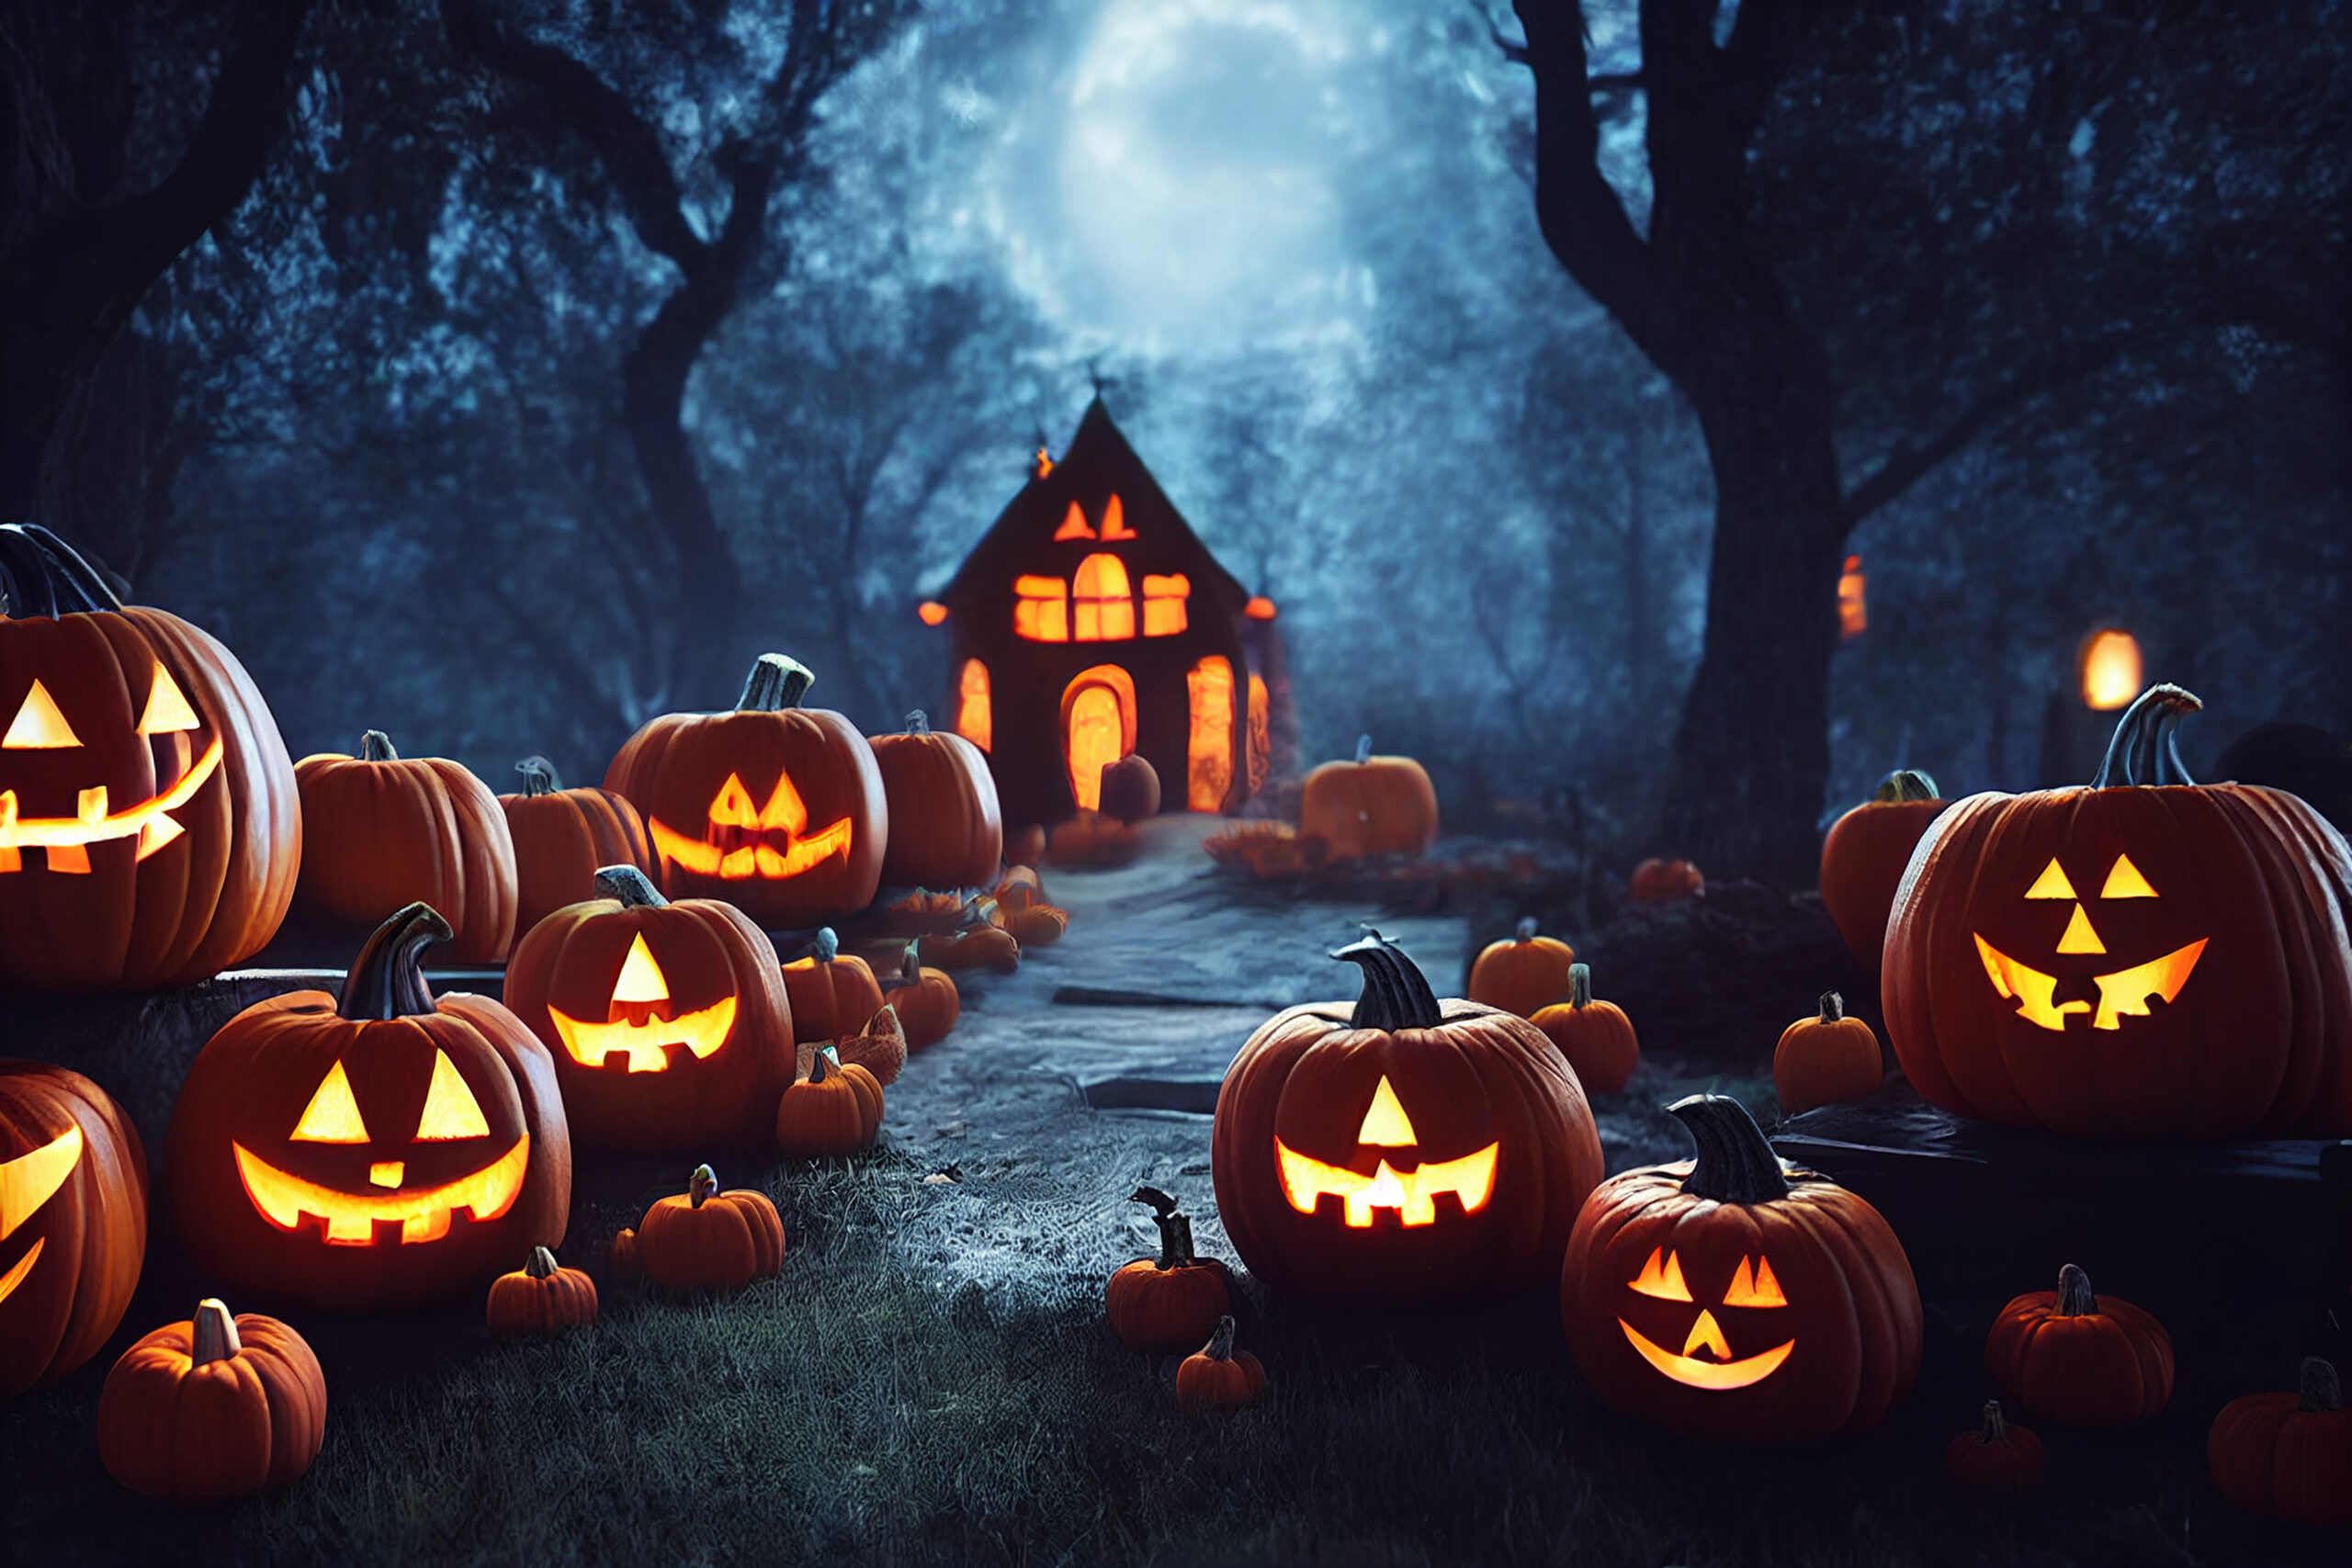 6 Tips to keep your home safe at Halloween